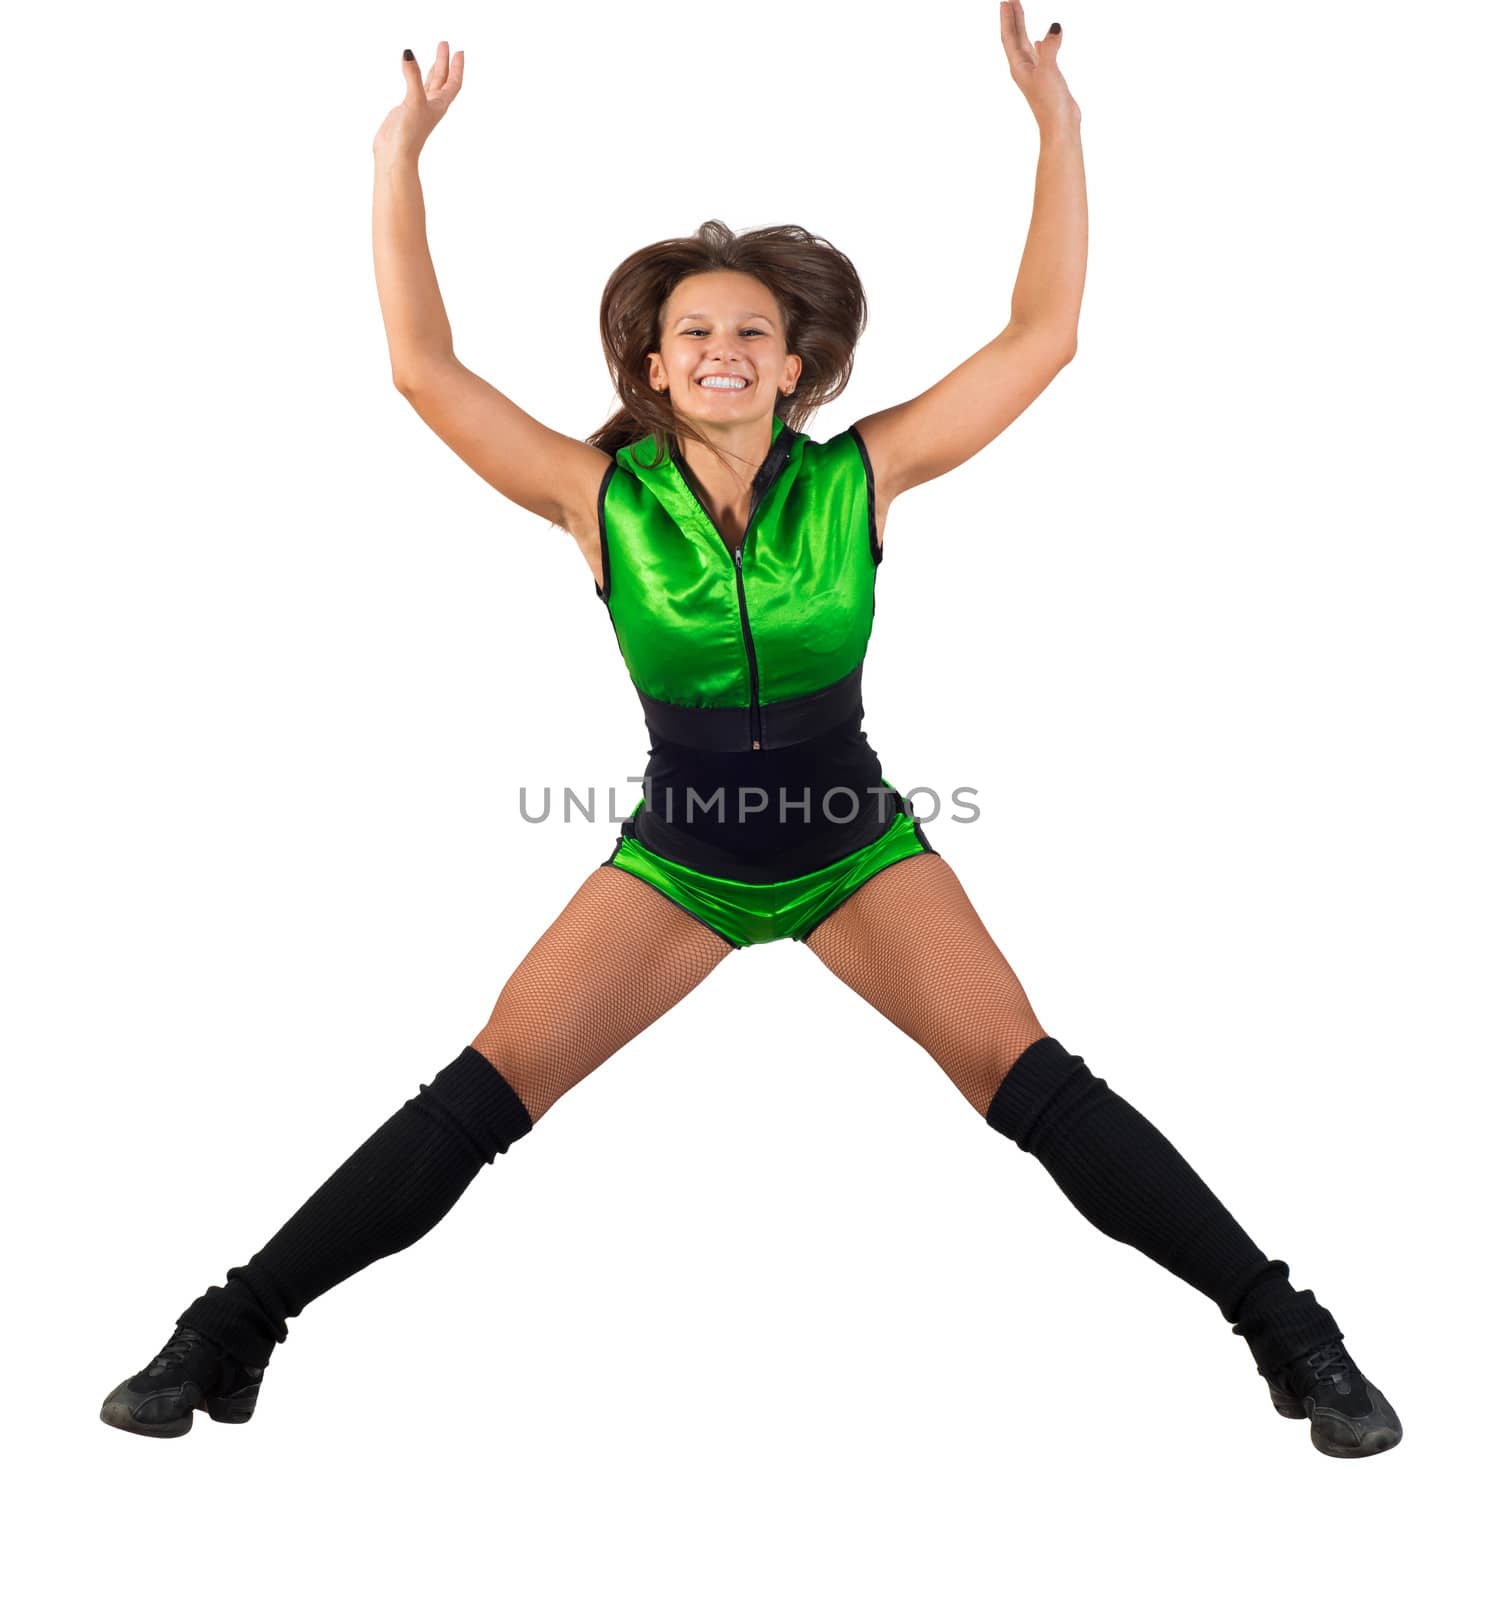 image of a athletic young woman jumping, isolated on white background